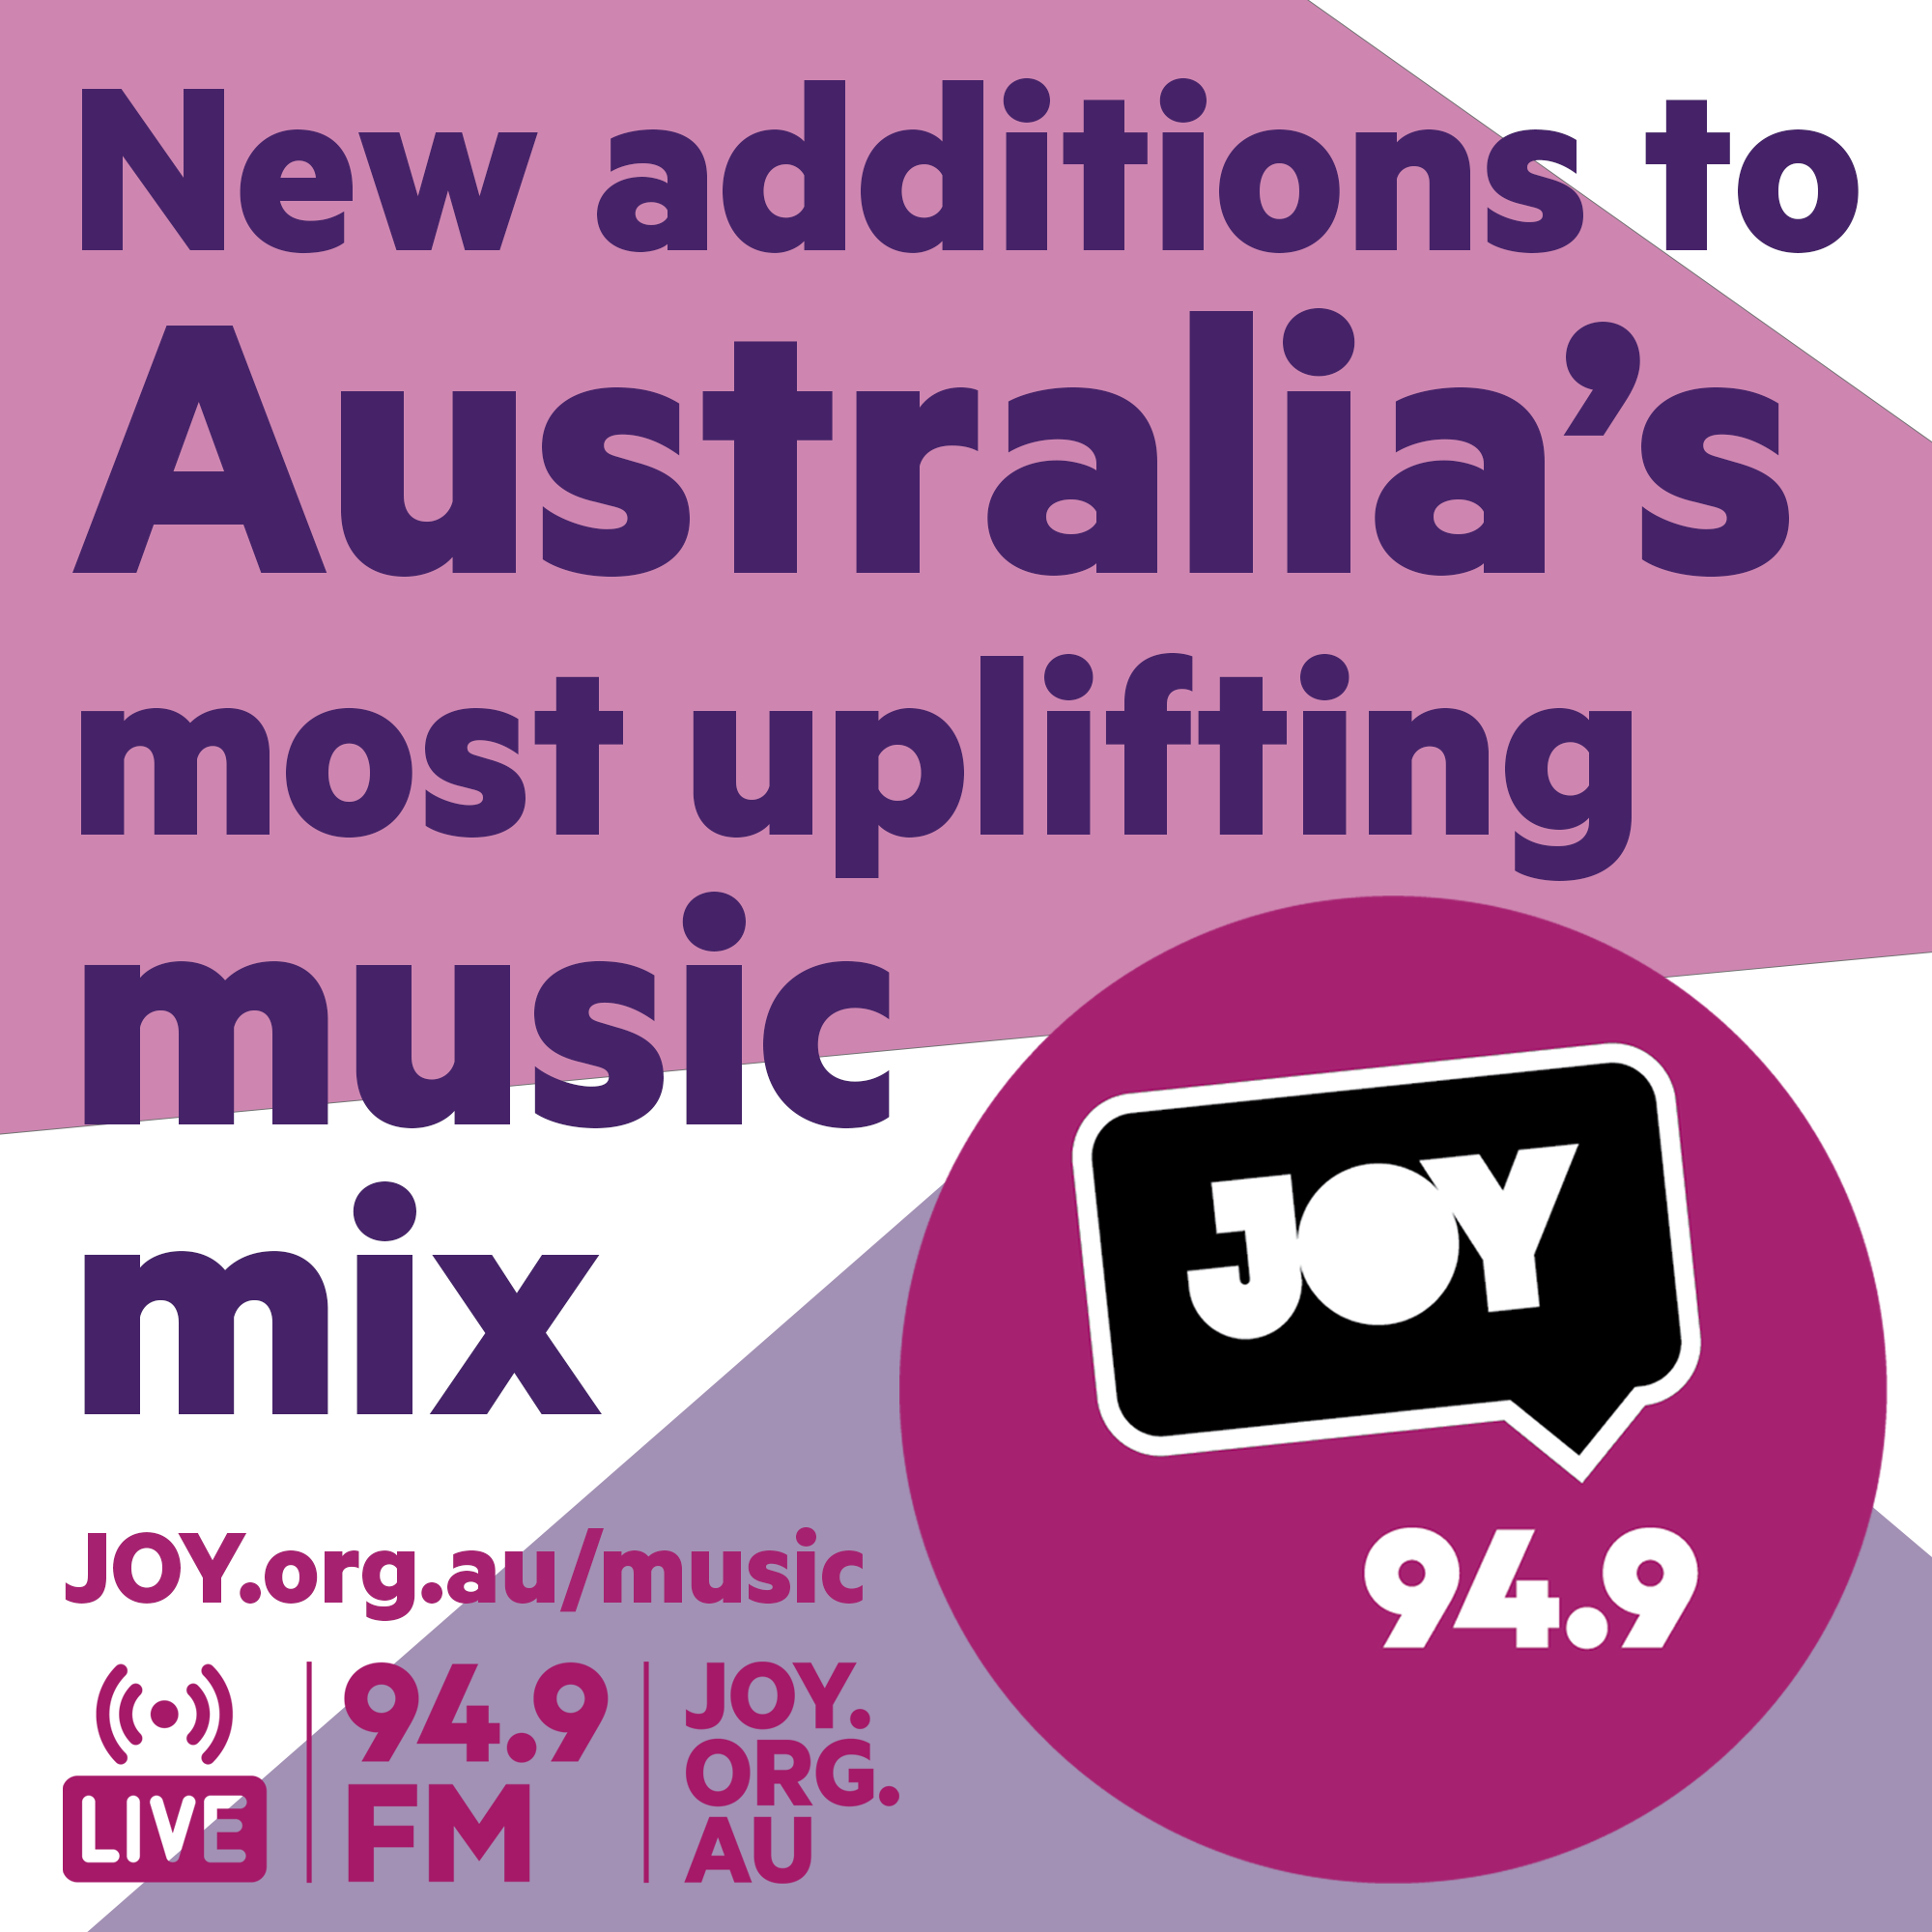 The newest songs to Australia’s most uplifting music mix: 6 July 2022